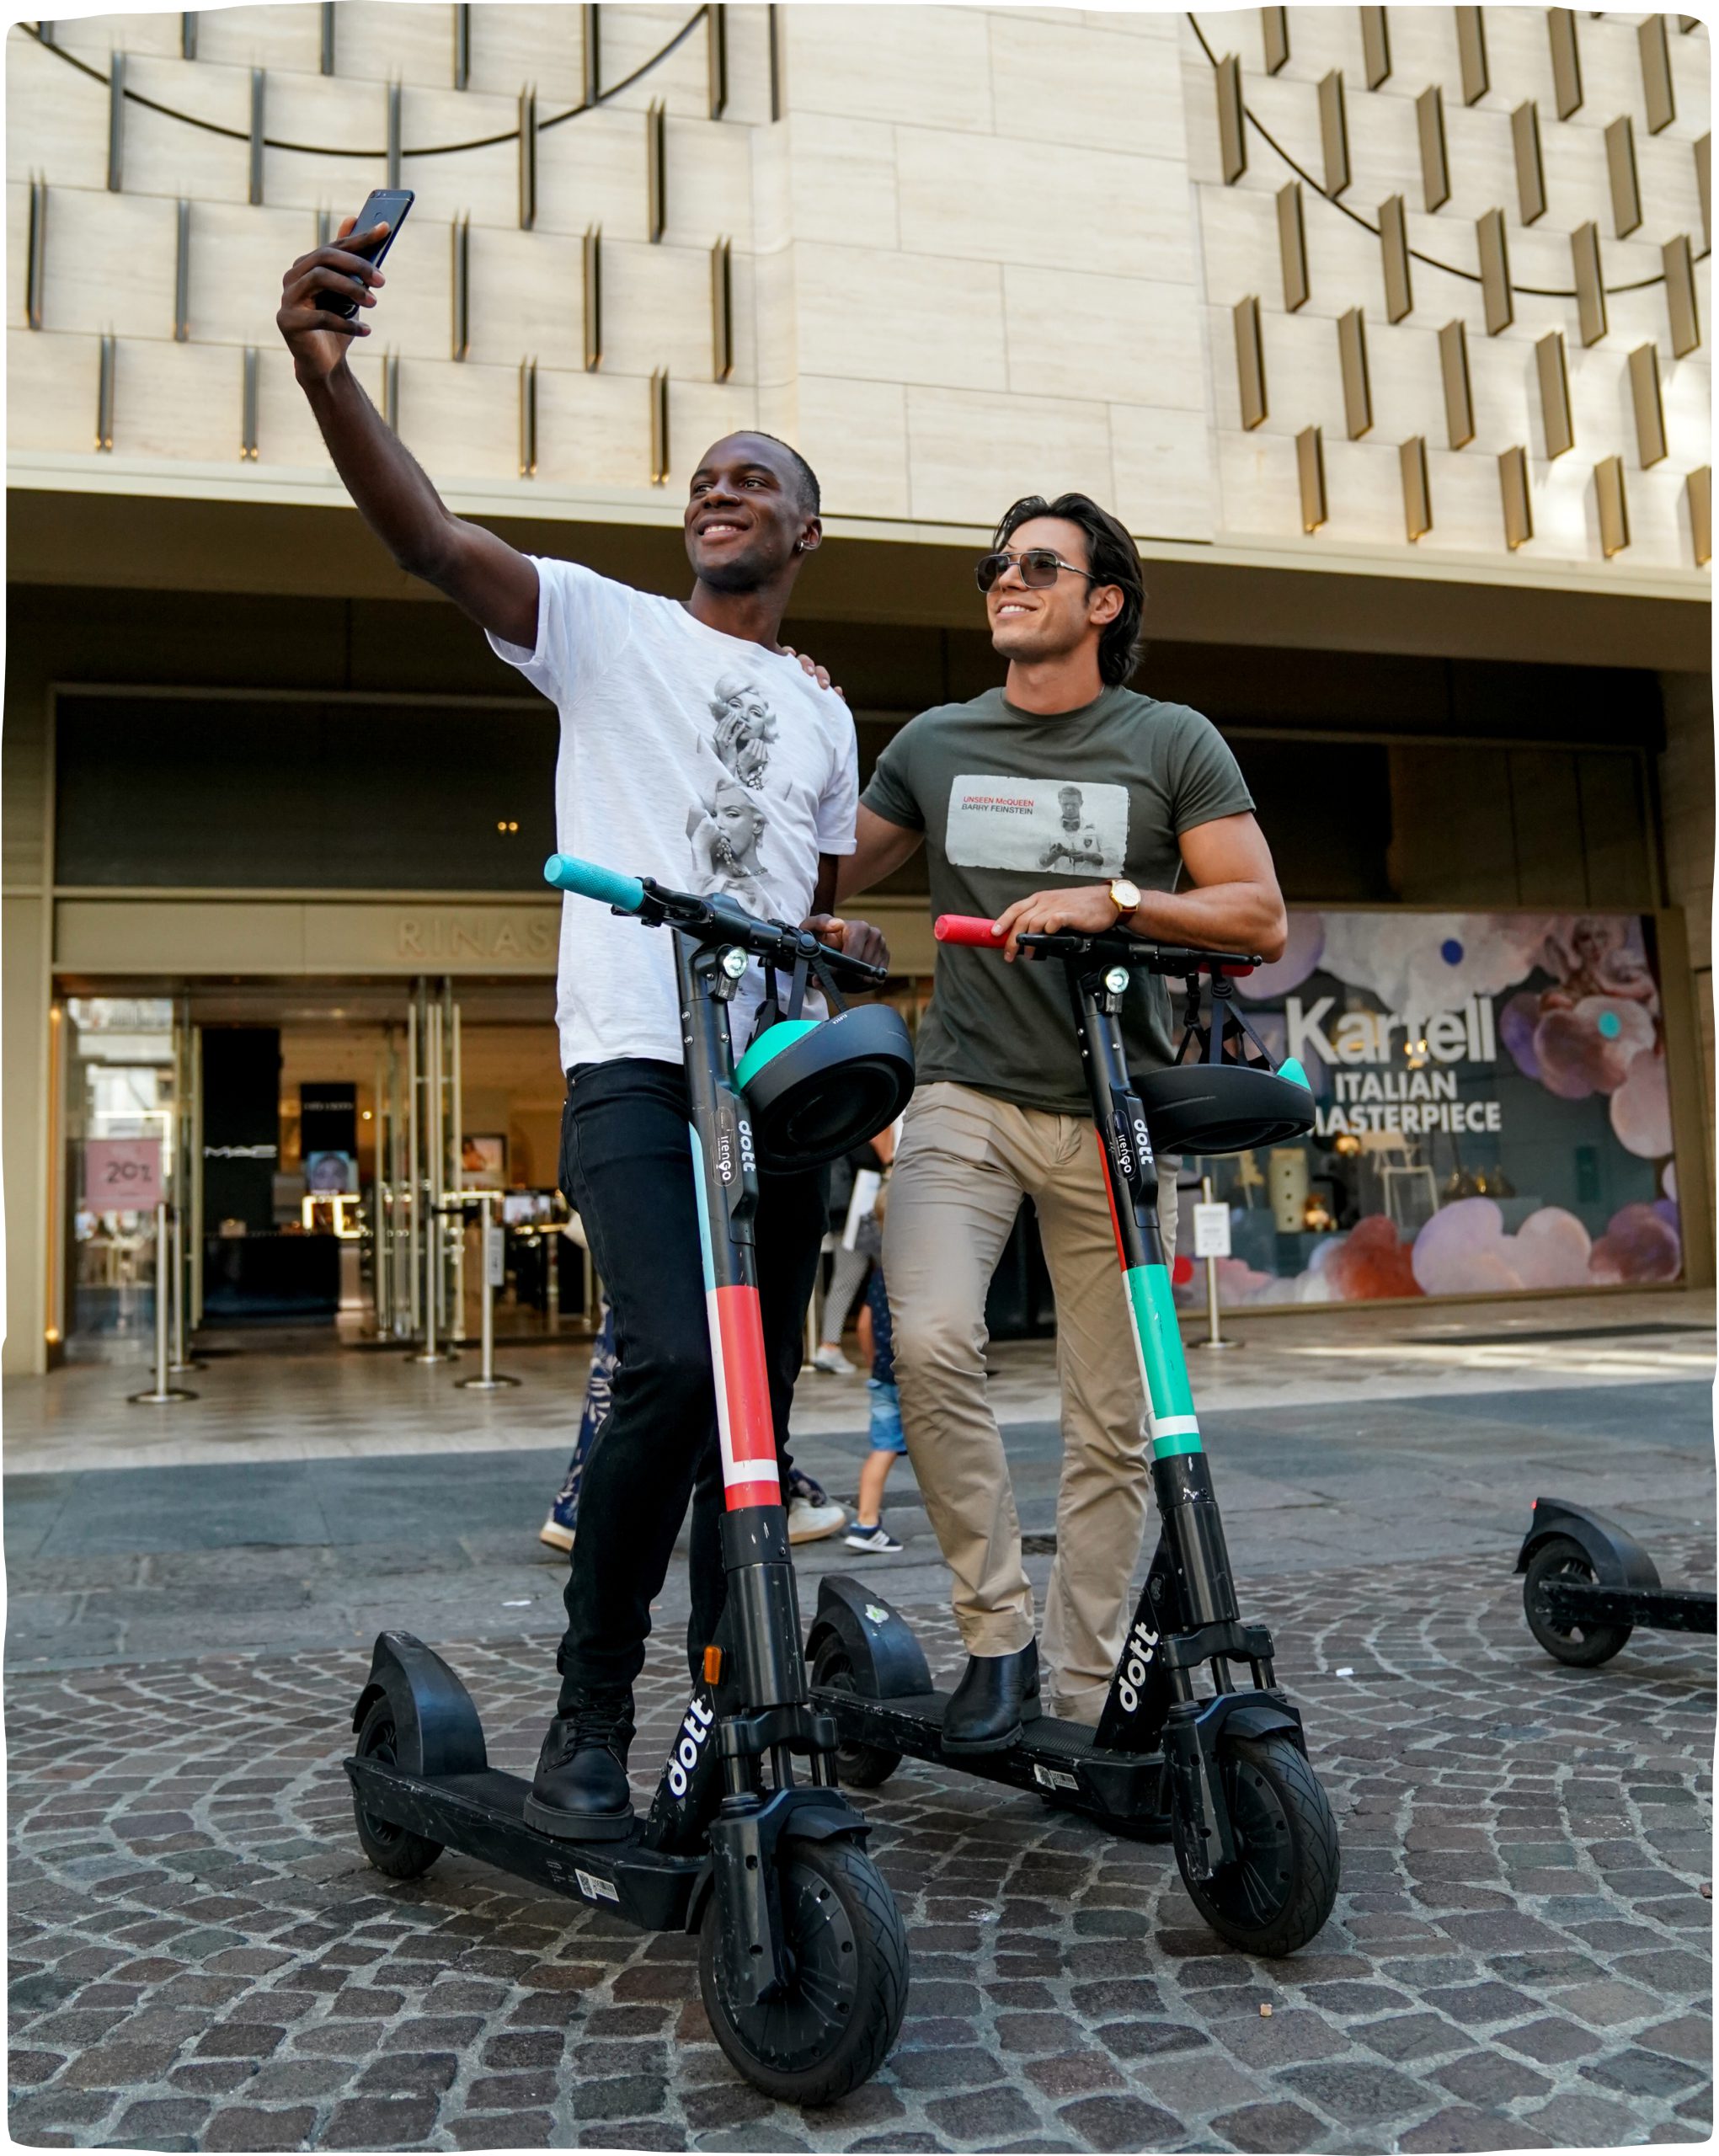 Two men take a selfie together on Dotts on a cobblestone city street.  One man holds the phone with his arm outstretched as the other casually rests his foot on the scooter.